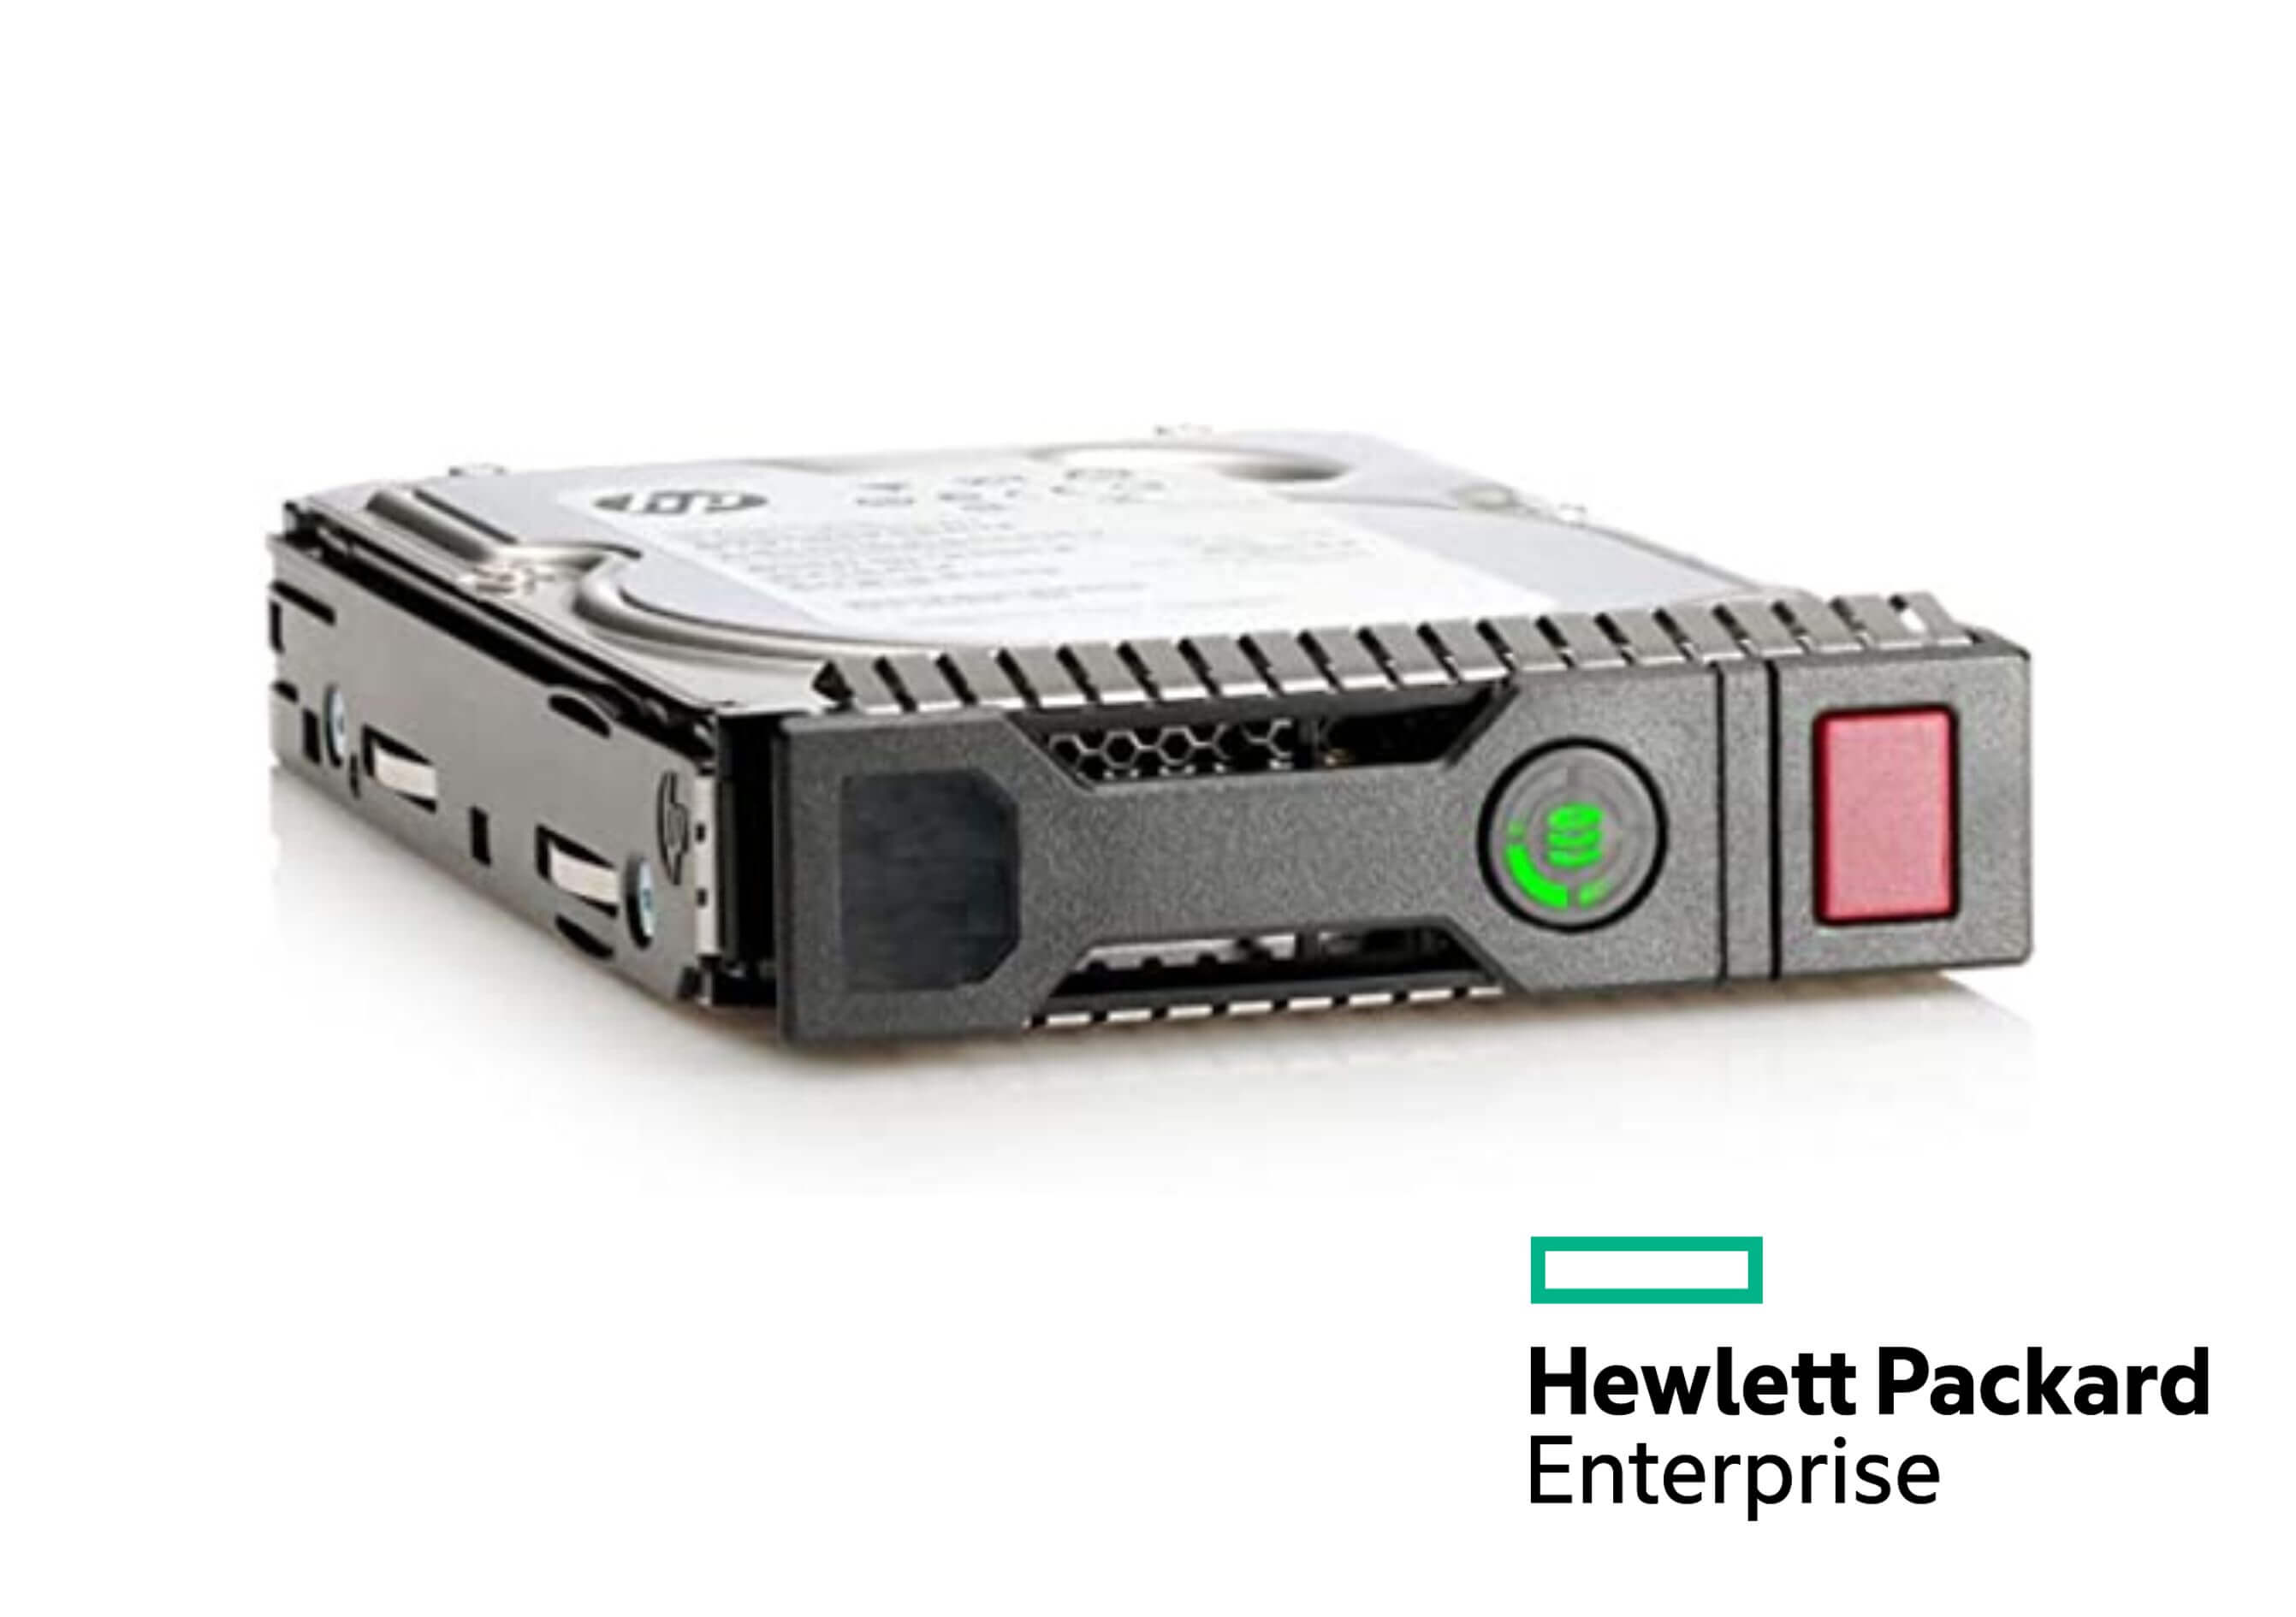 HPE Part 653949-001 HPE 72GB hot-plug dual-port SAS hard disk drive - 15,000 RPM, 6Gb/sec transfer rate, 2.5-inch small form factor (SFF), Enterprise, SmartDrive Carrier (SC) - Not for use in MSA products <br/><b>Option equivalent: 652597-B21</b>